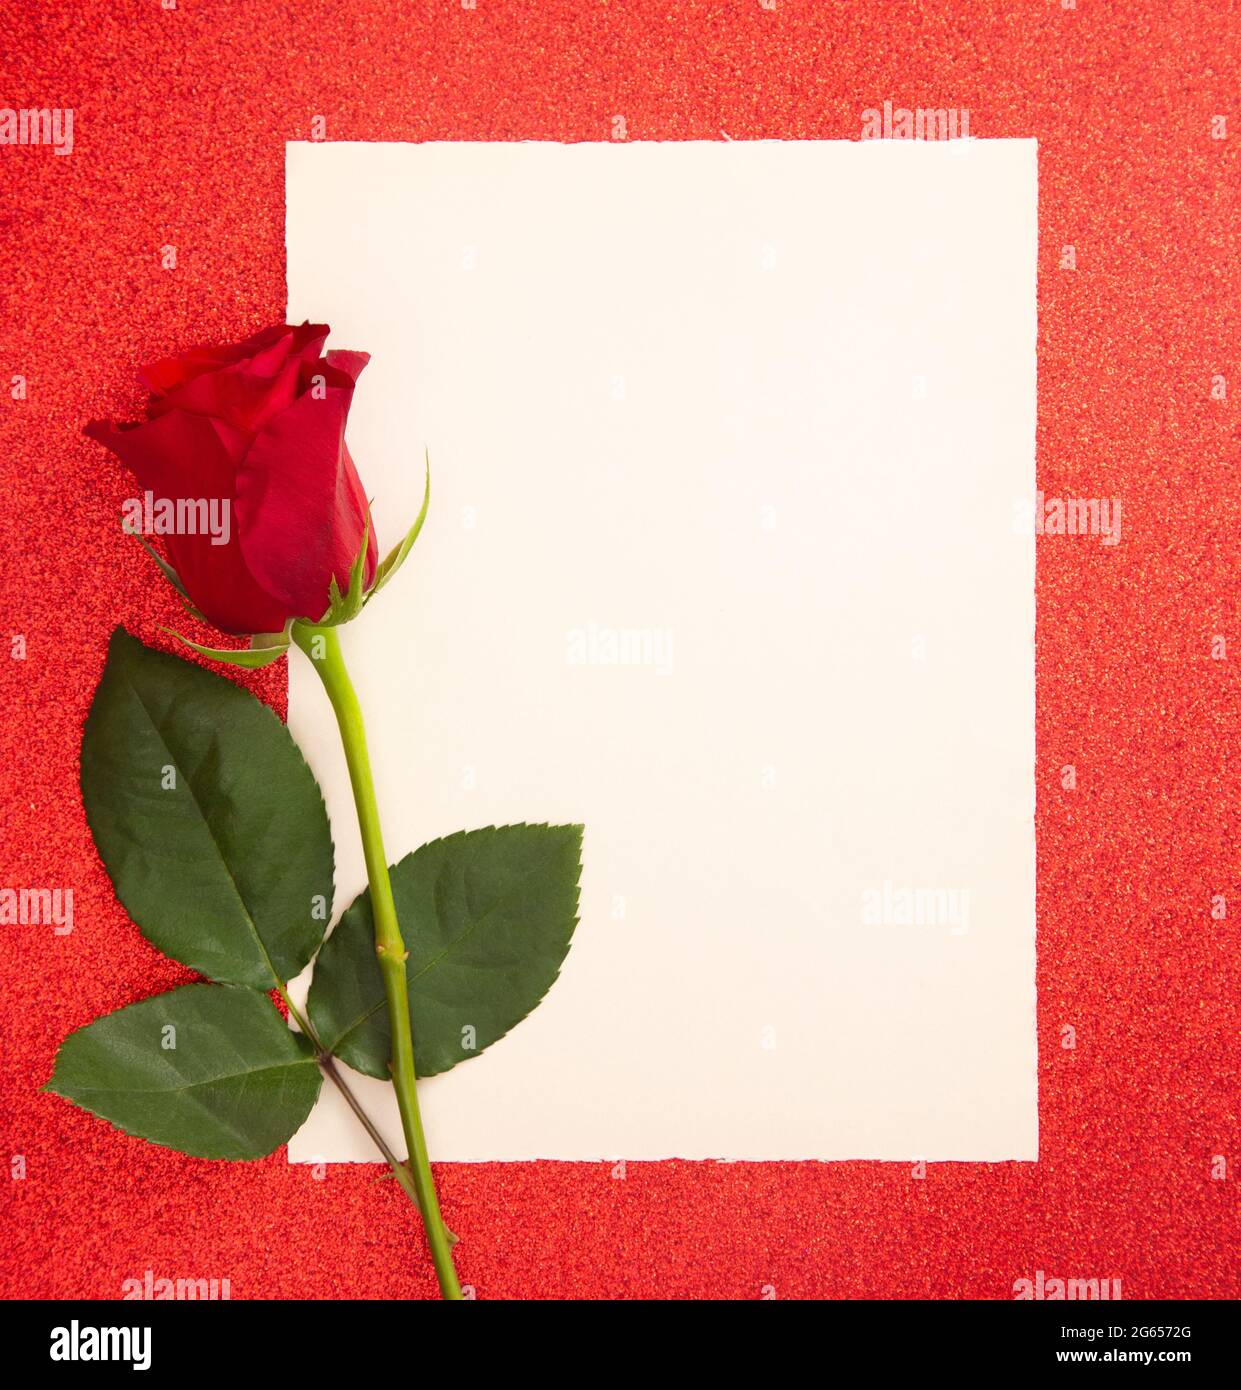 A Single Rose with a Blank Page for Writing a Love Note Stock Photo